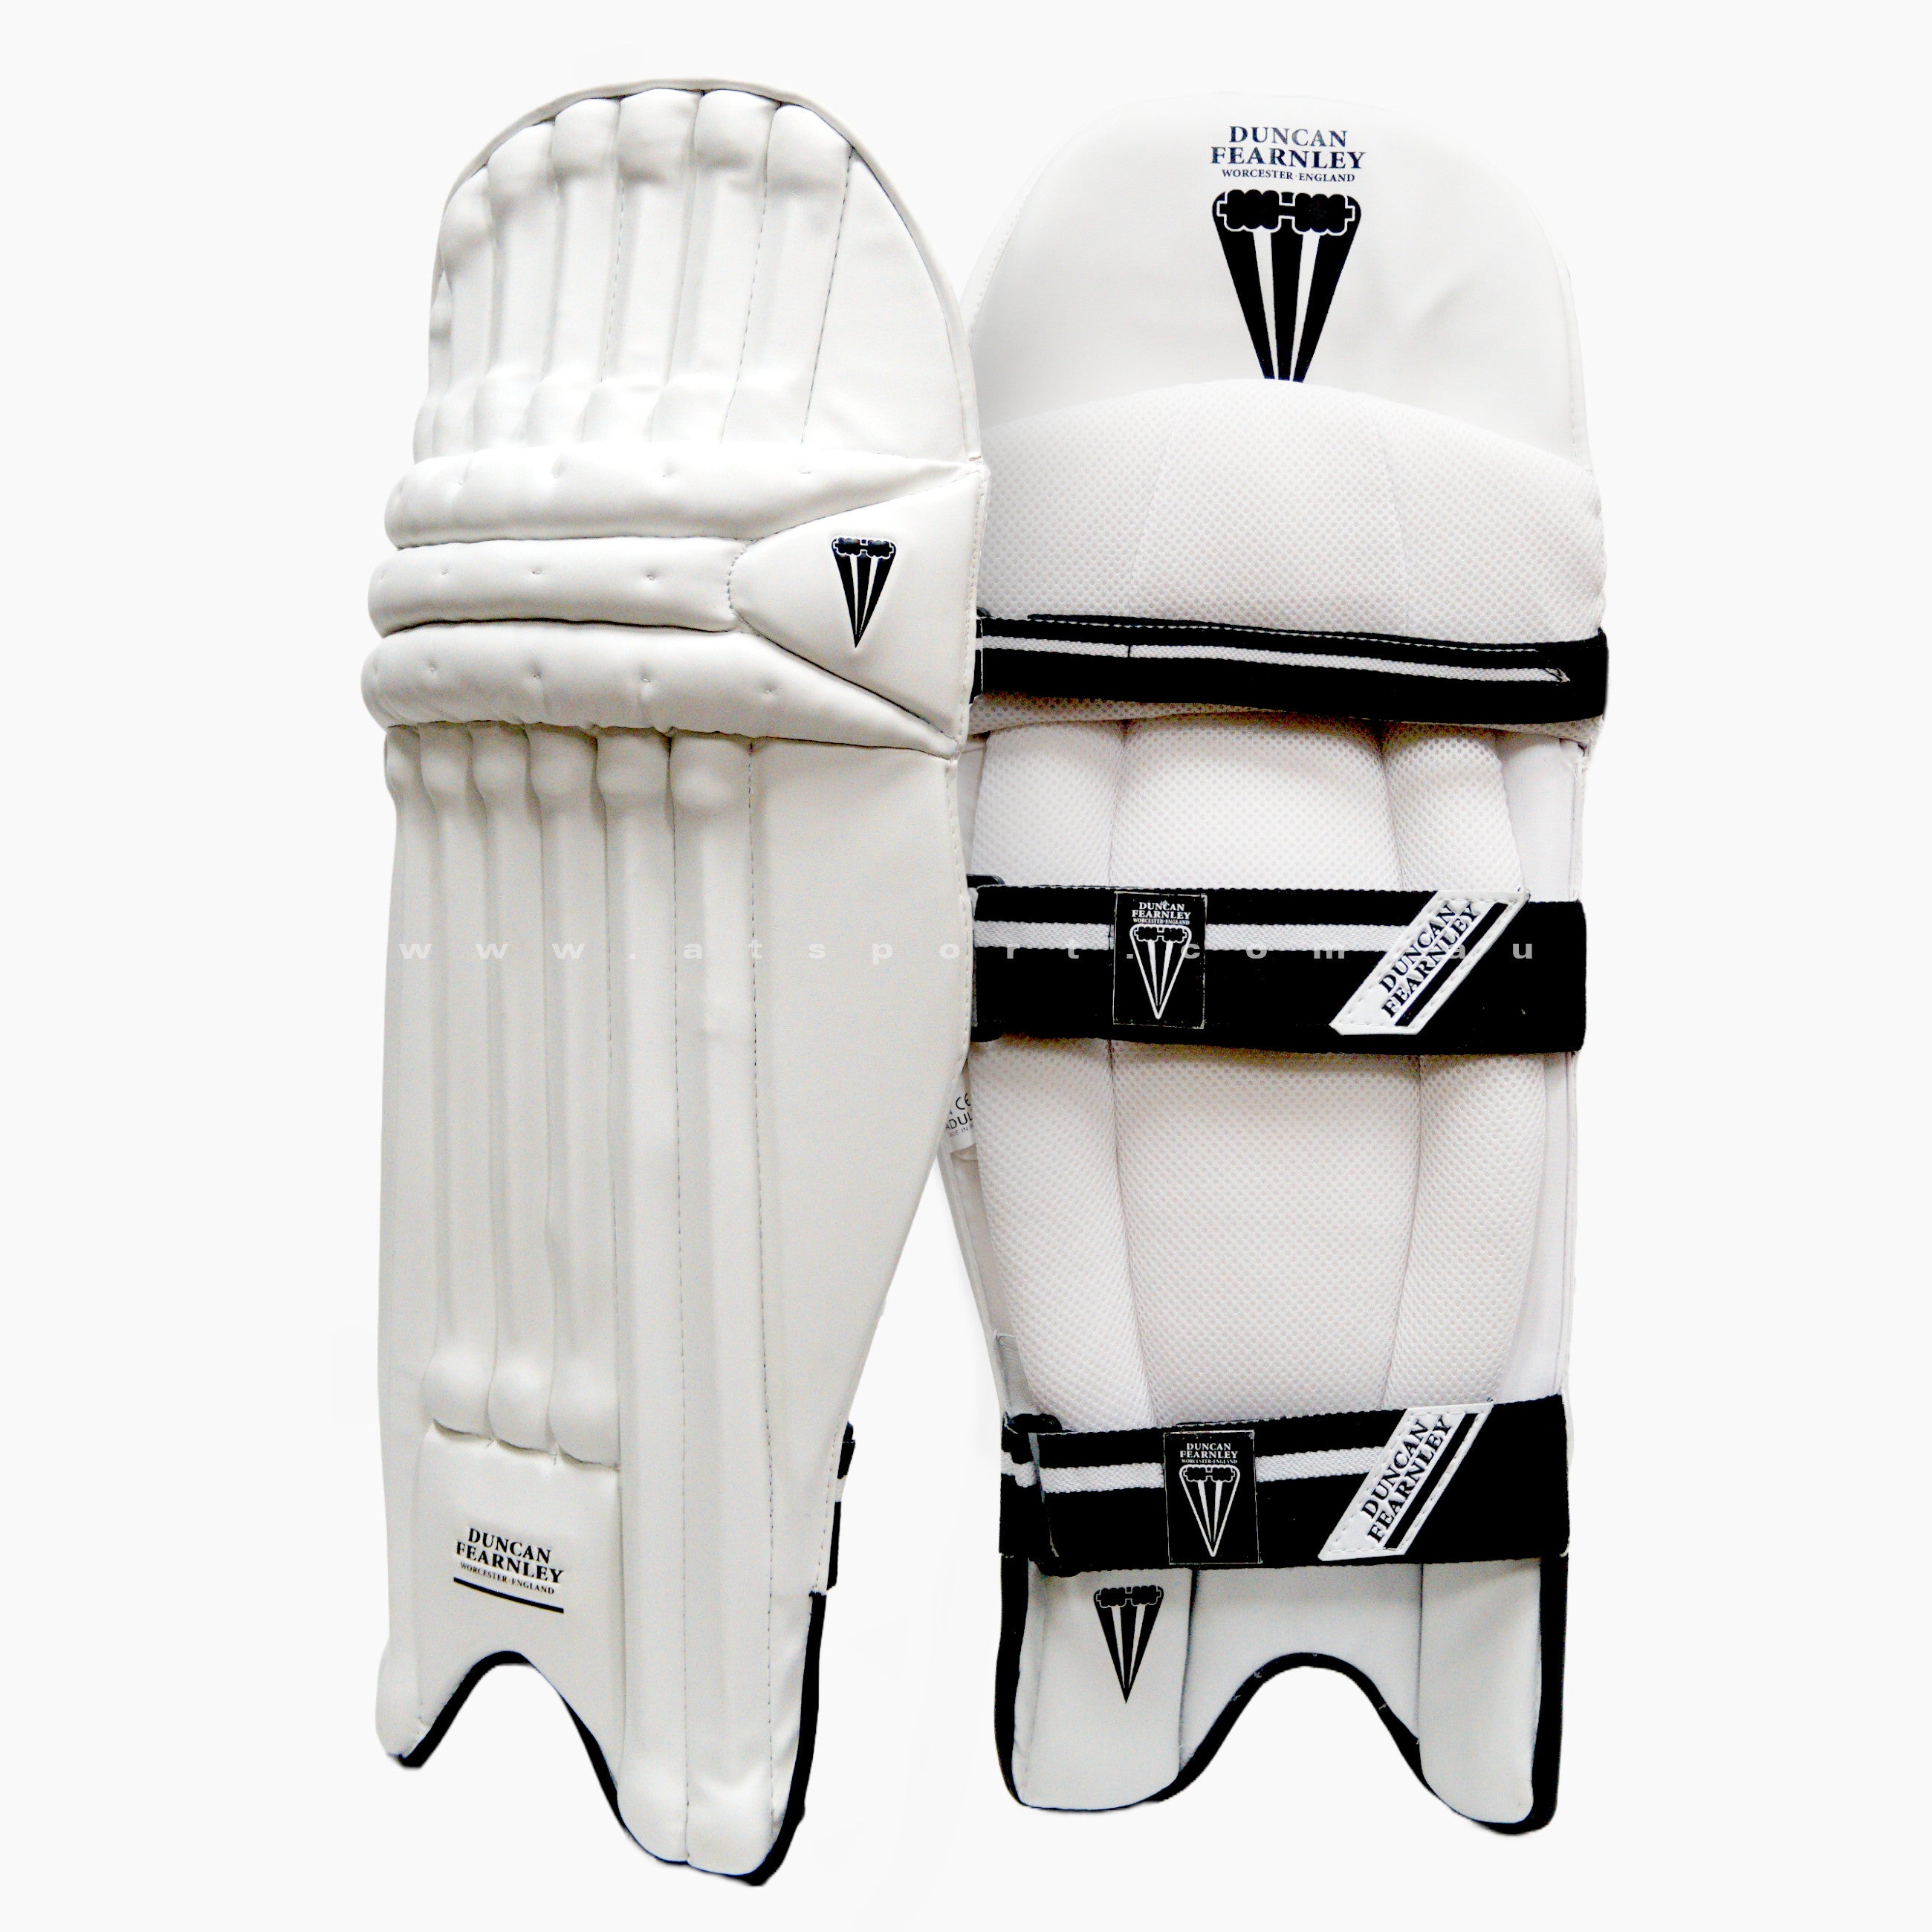 Duncan Fearnley Heritage Cricket Batting Pads - YOUTH